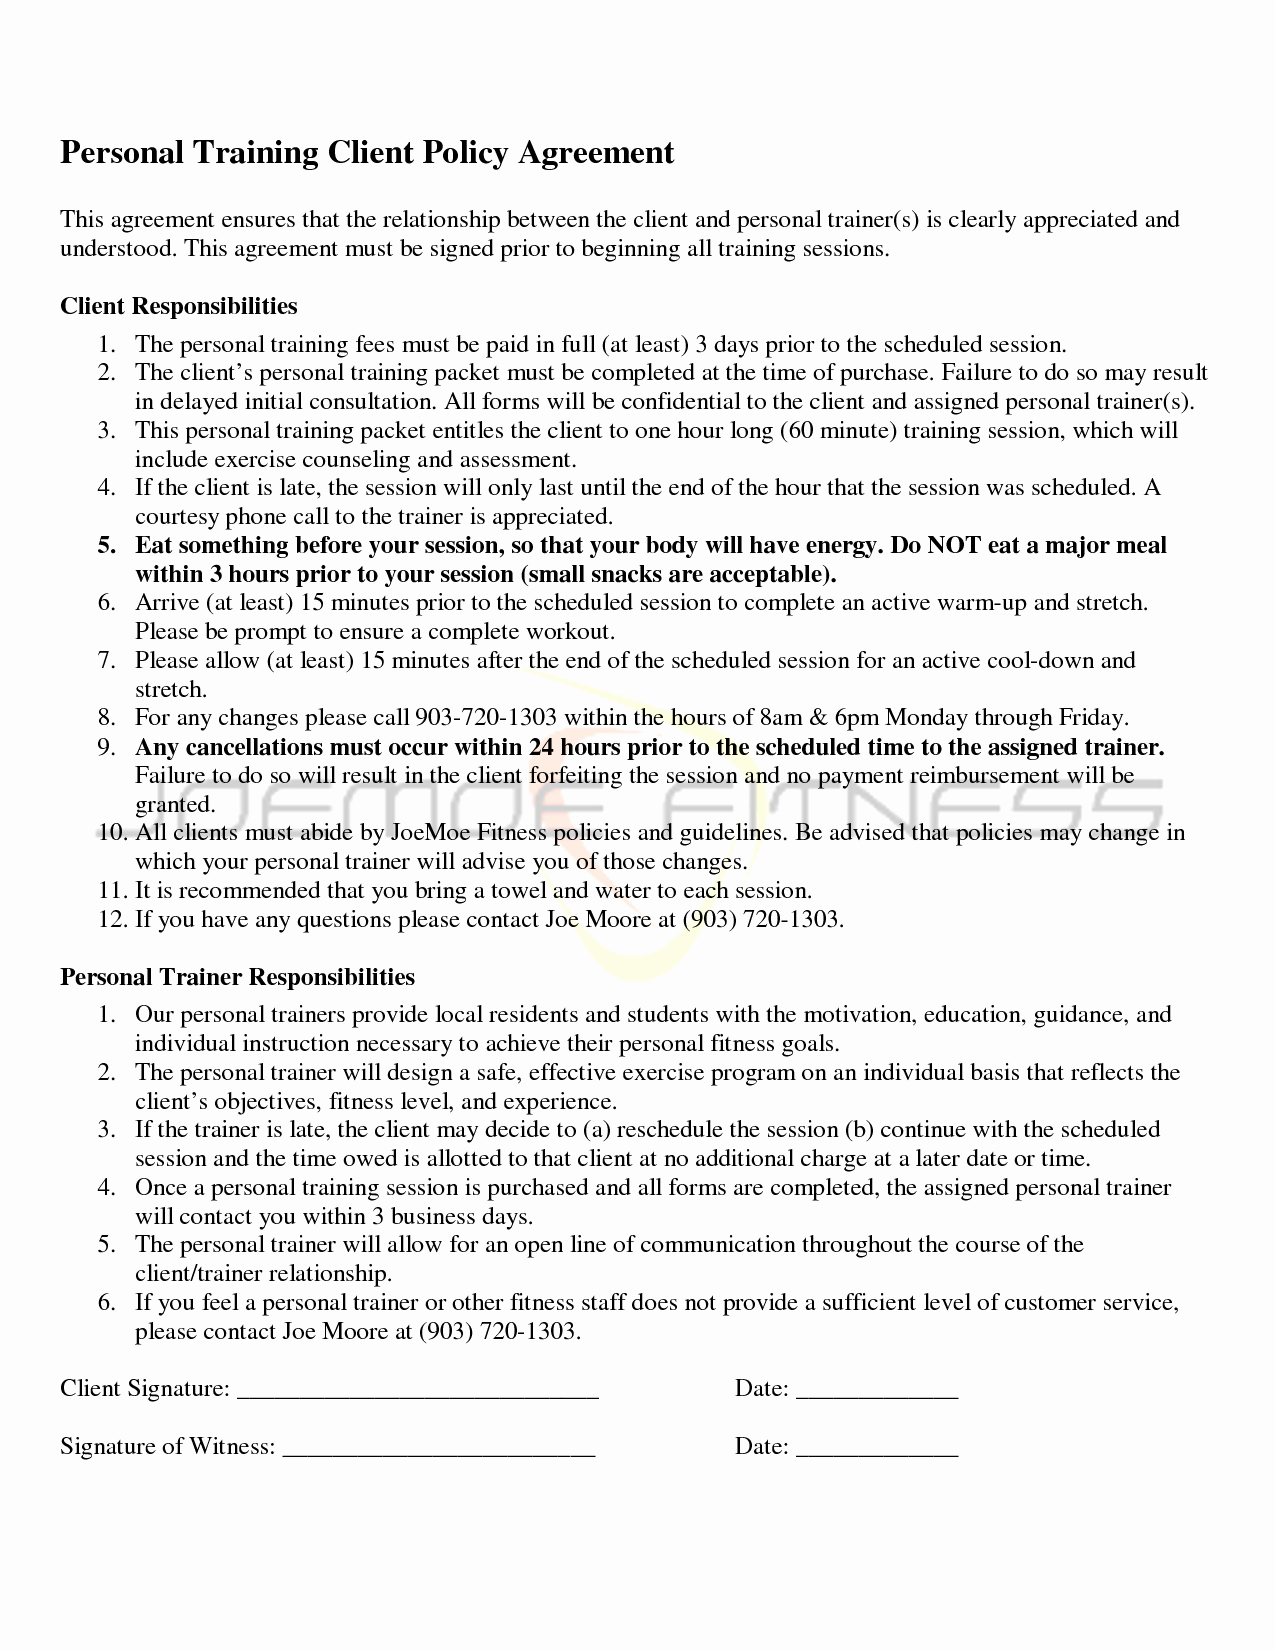 Personal Training Agreement Template New Personal Training Agreement Free Printable Documents